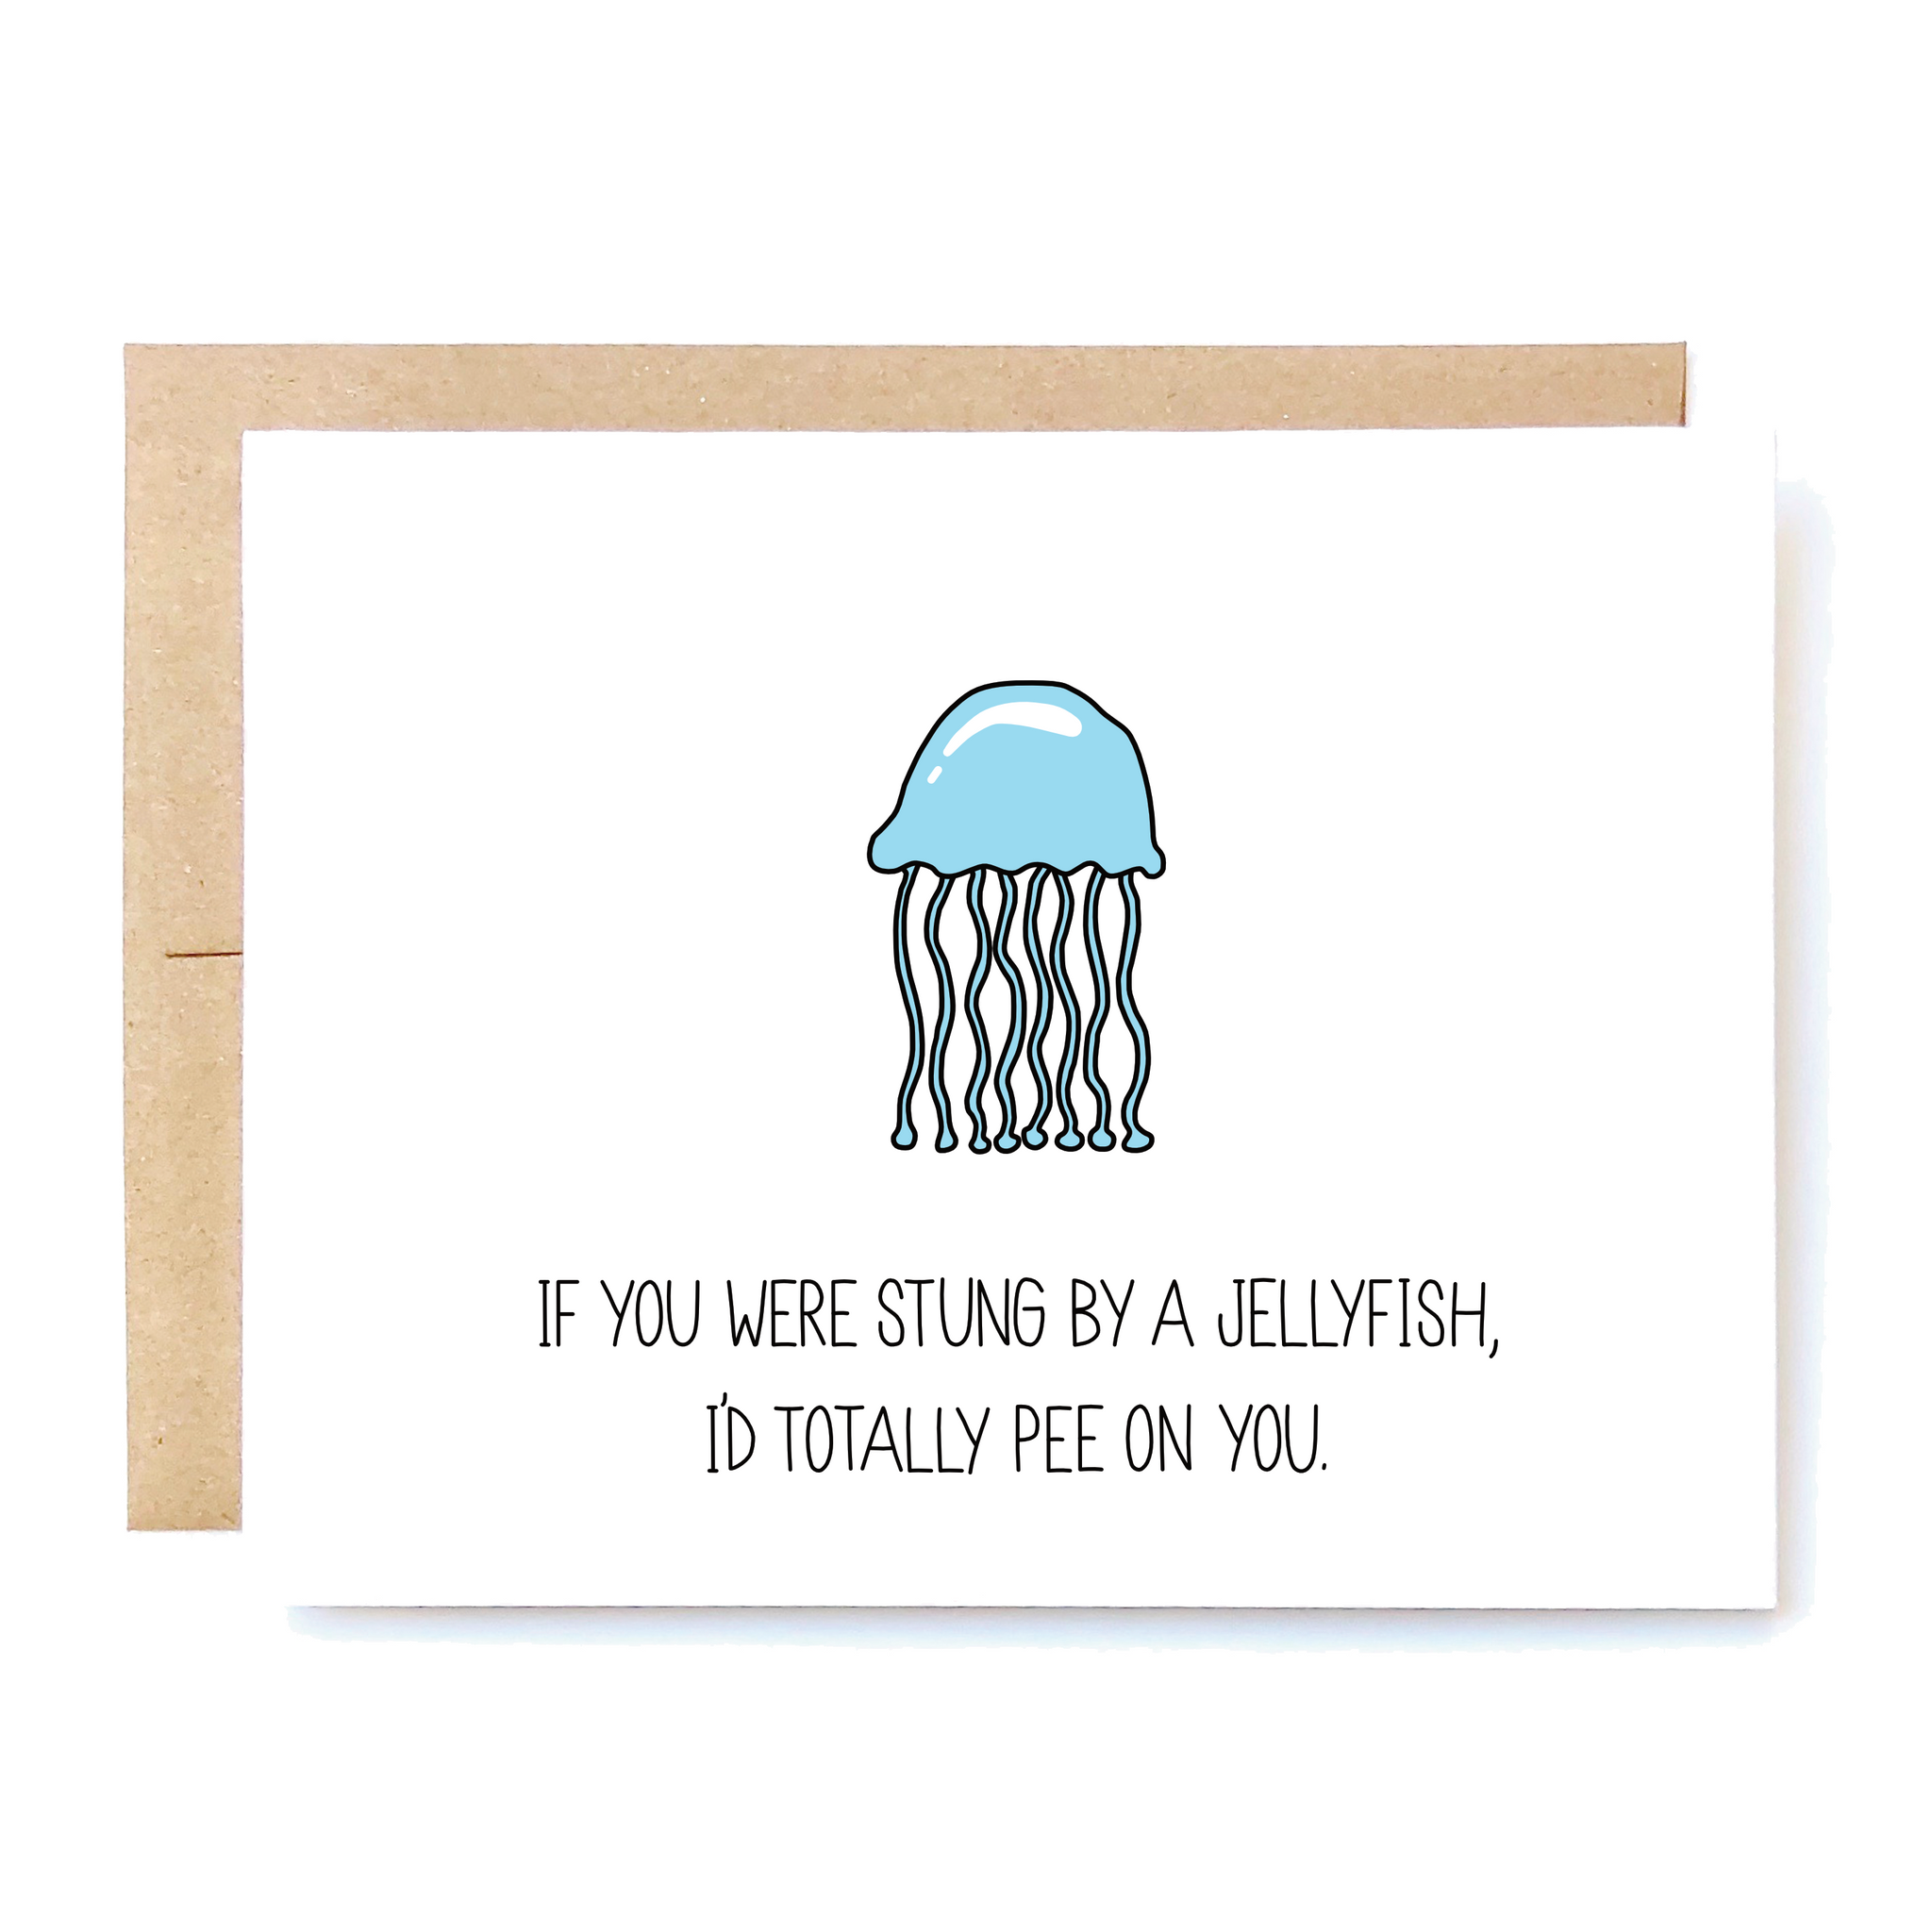 Card Front: If you were stung by a jellyfish, I'd totally pee on you.